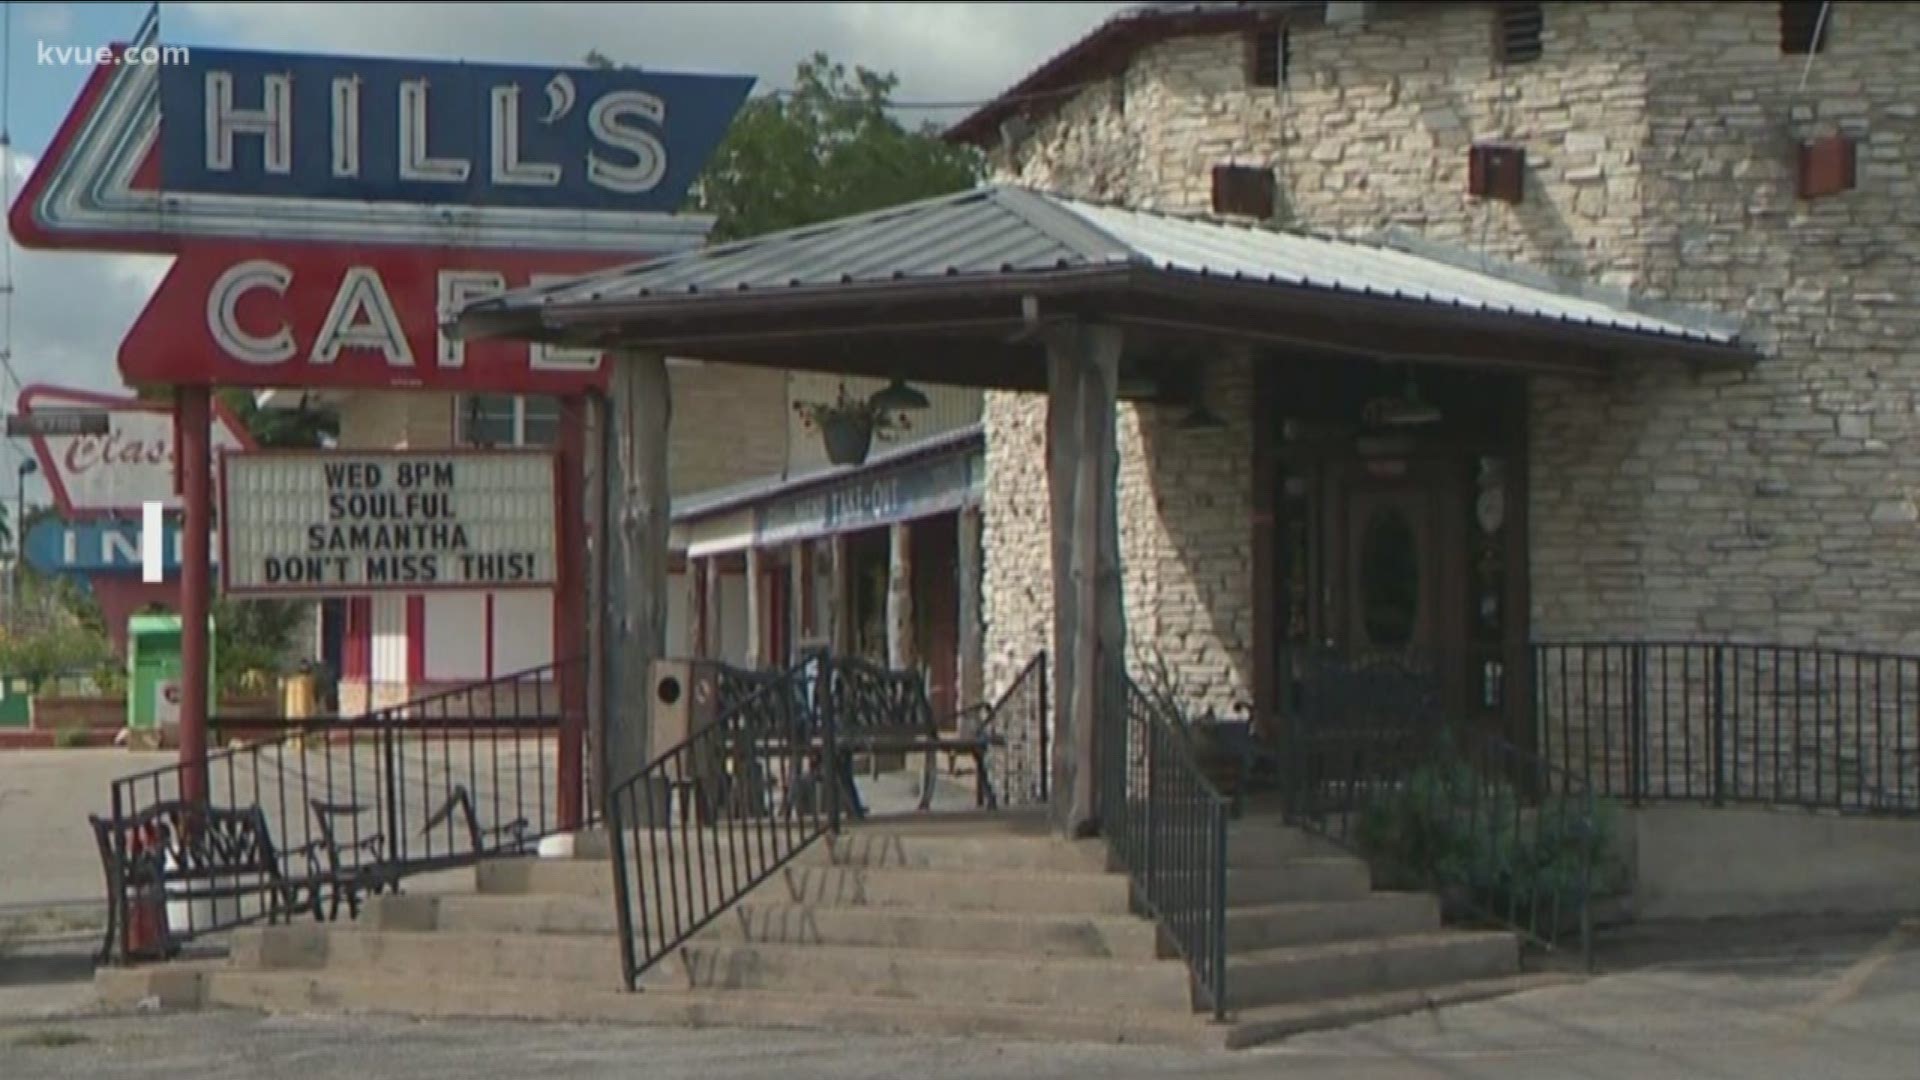 It seems several mainstay restaurants are closing across Austin and many of them blame the high cost of living. Here's a look at some iconic Austin restaurants who have closed their doors.